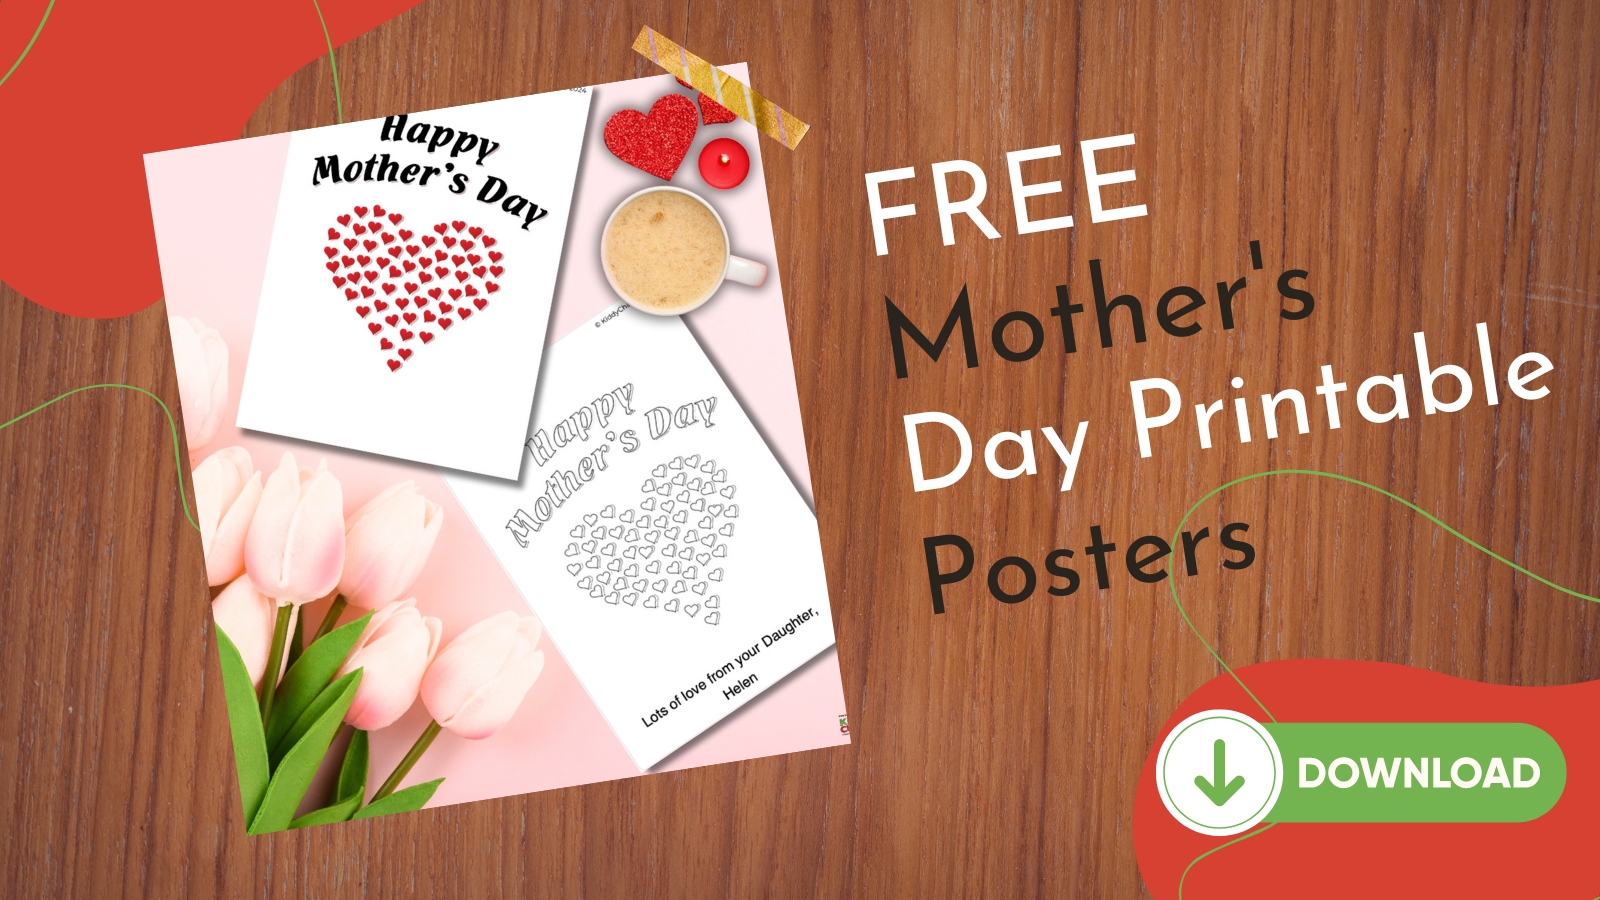 Celebrate Mother’s Day with a Personal Touch: Printable Card Ideas